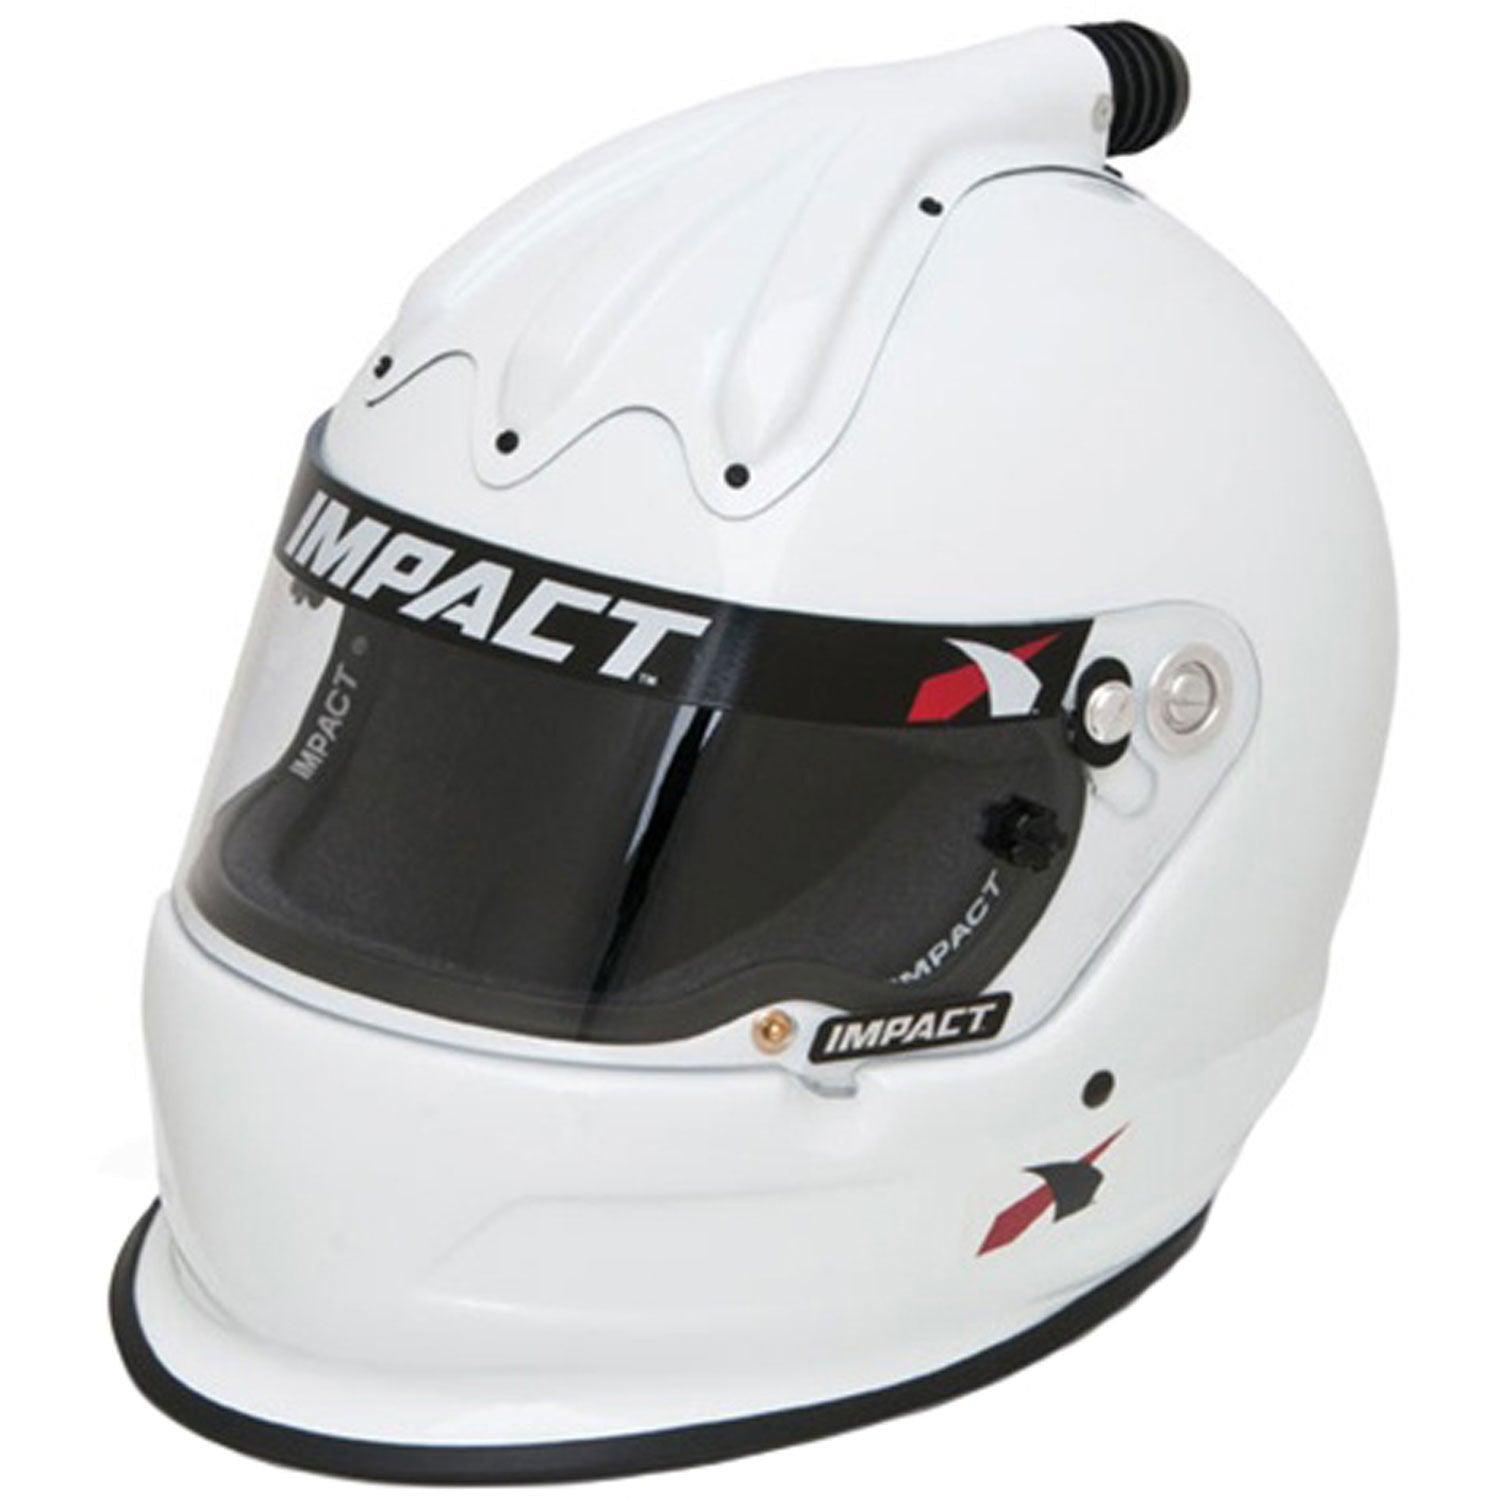 Helmet Super Charger Large White SA2020 - Burlile Performance Products